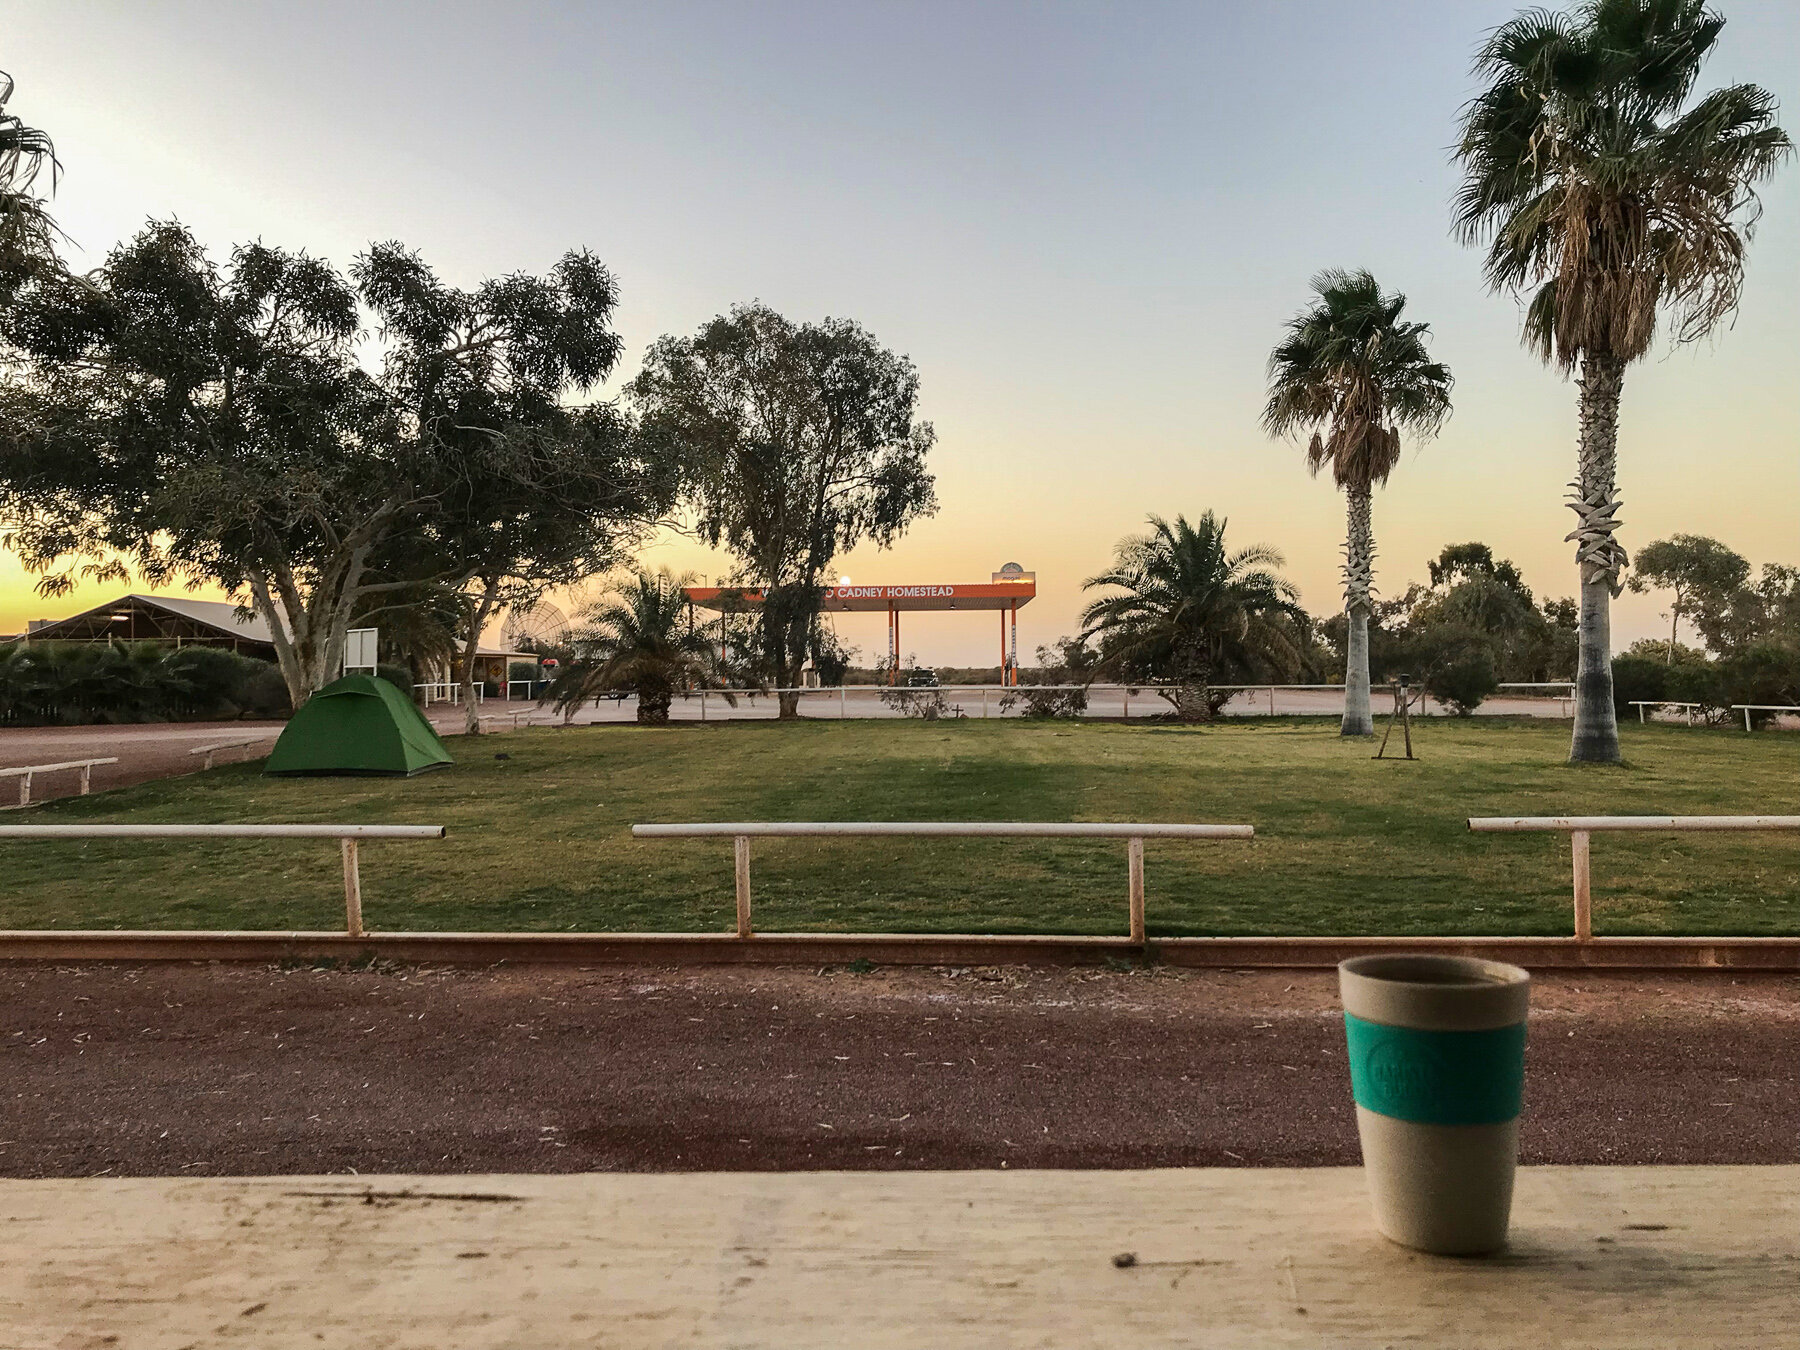  Camping at Cadney Homestead Roadhouse.    The whole evening was very relaxing and peaceful. It was exactly what I needed after a tiring day of cycling. I always look forward to my coffee break. It's a time for me to take a breather, relax, and think